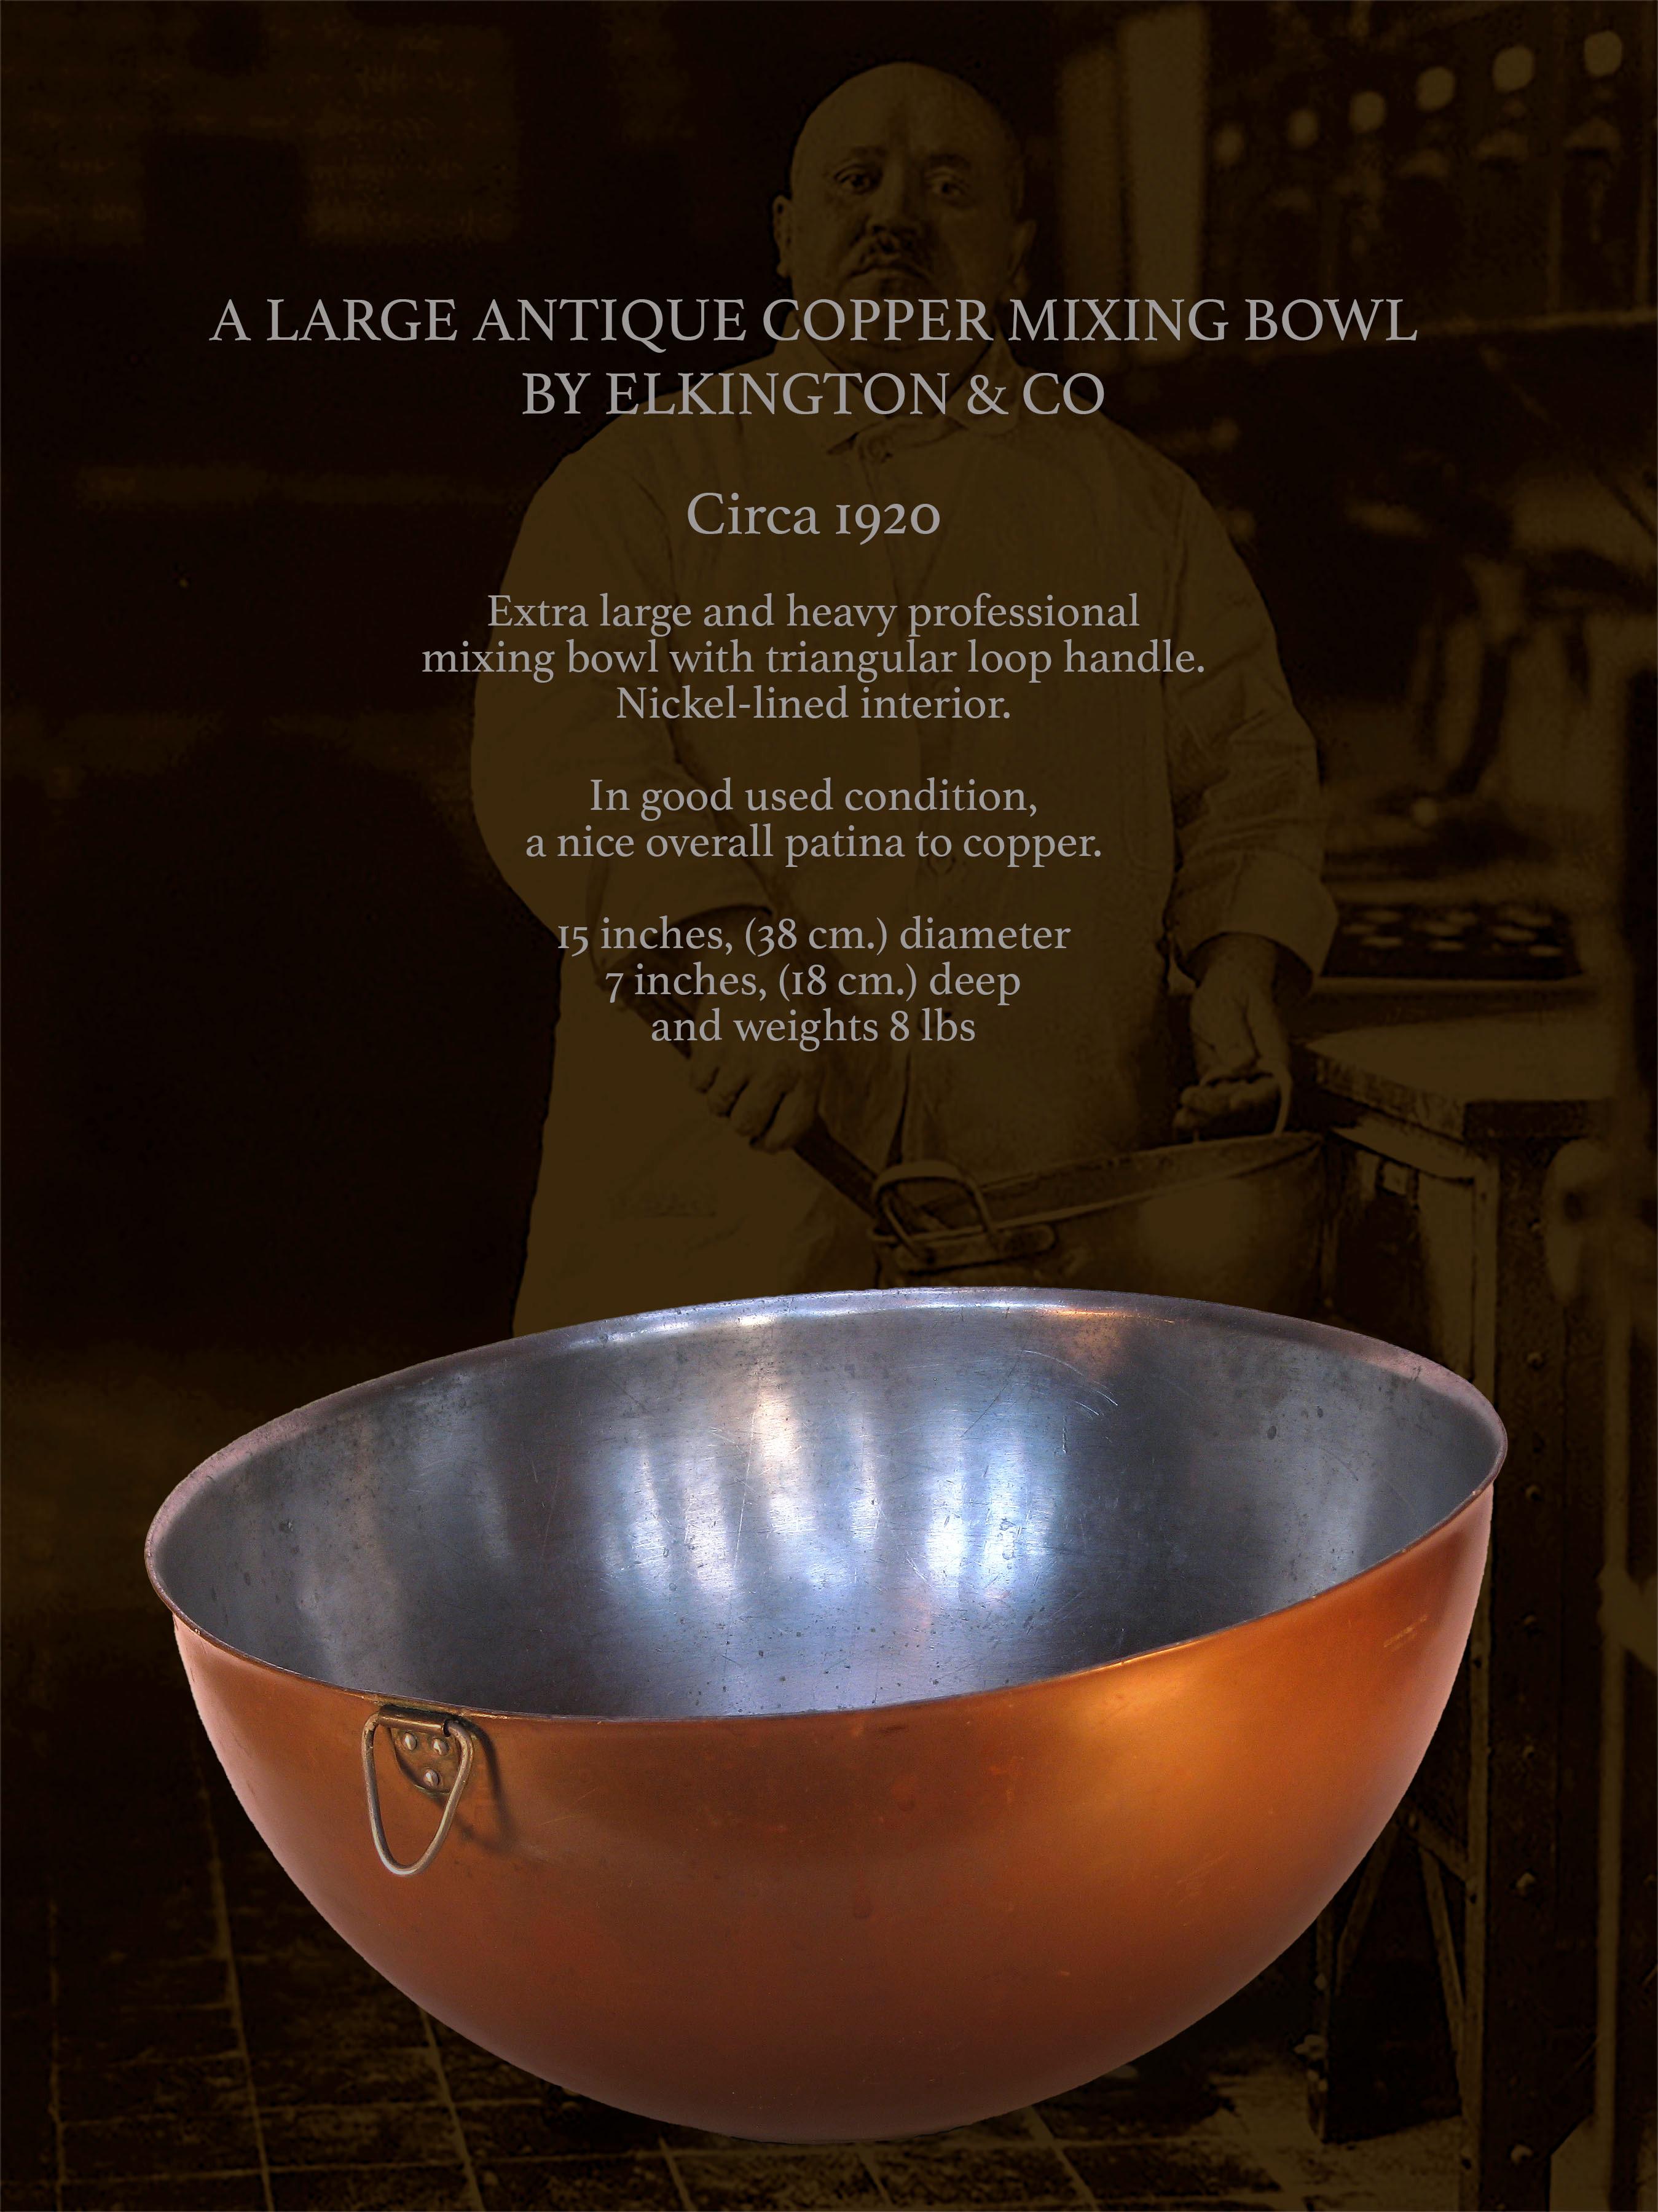 A LARGE ANTIQUE COPPER MIXING BOWL
BY ELKINGTON & CO

Circa 1920

Extra large and heavy professional
mixing bowl with triangular loop handle.
Interior appears to have somewhat
a harder coating, possibly a nickel.

In good used condition,
a nice